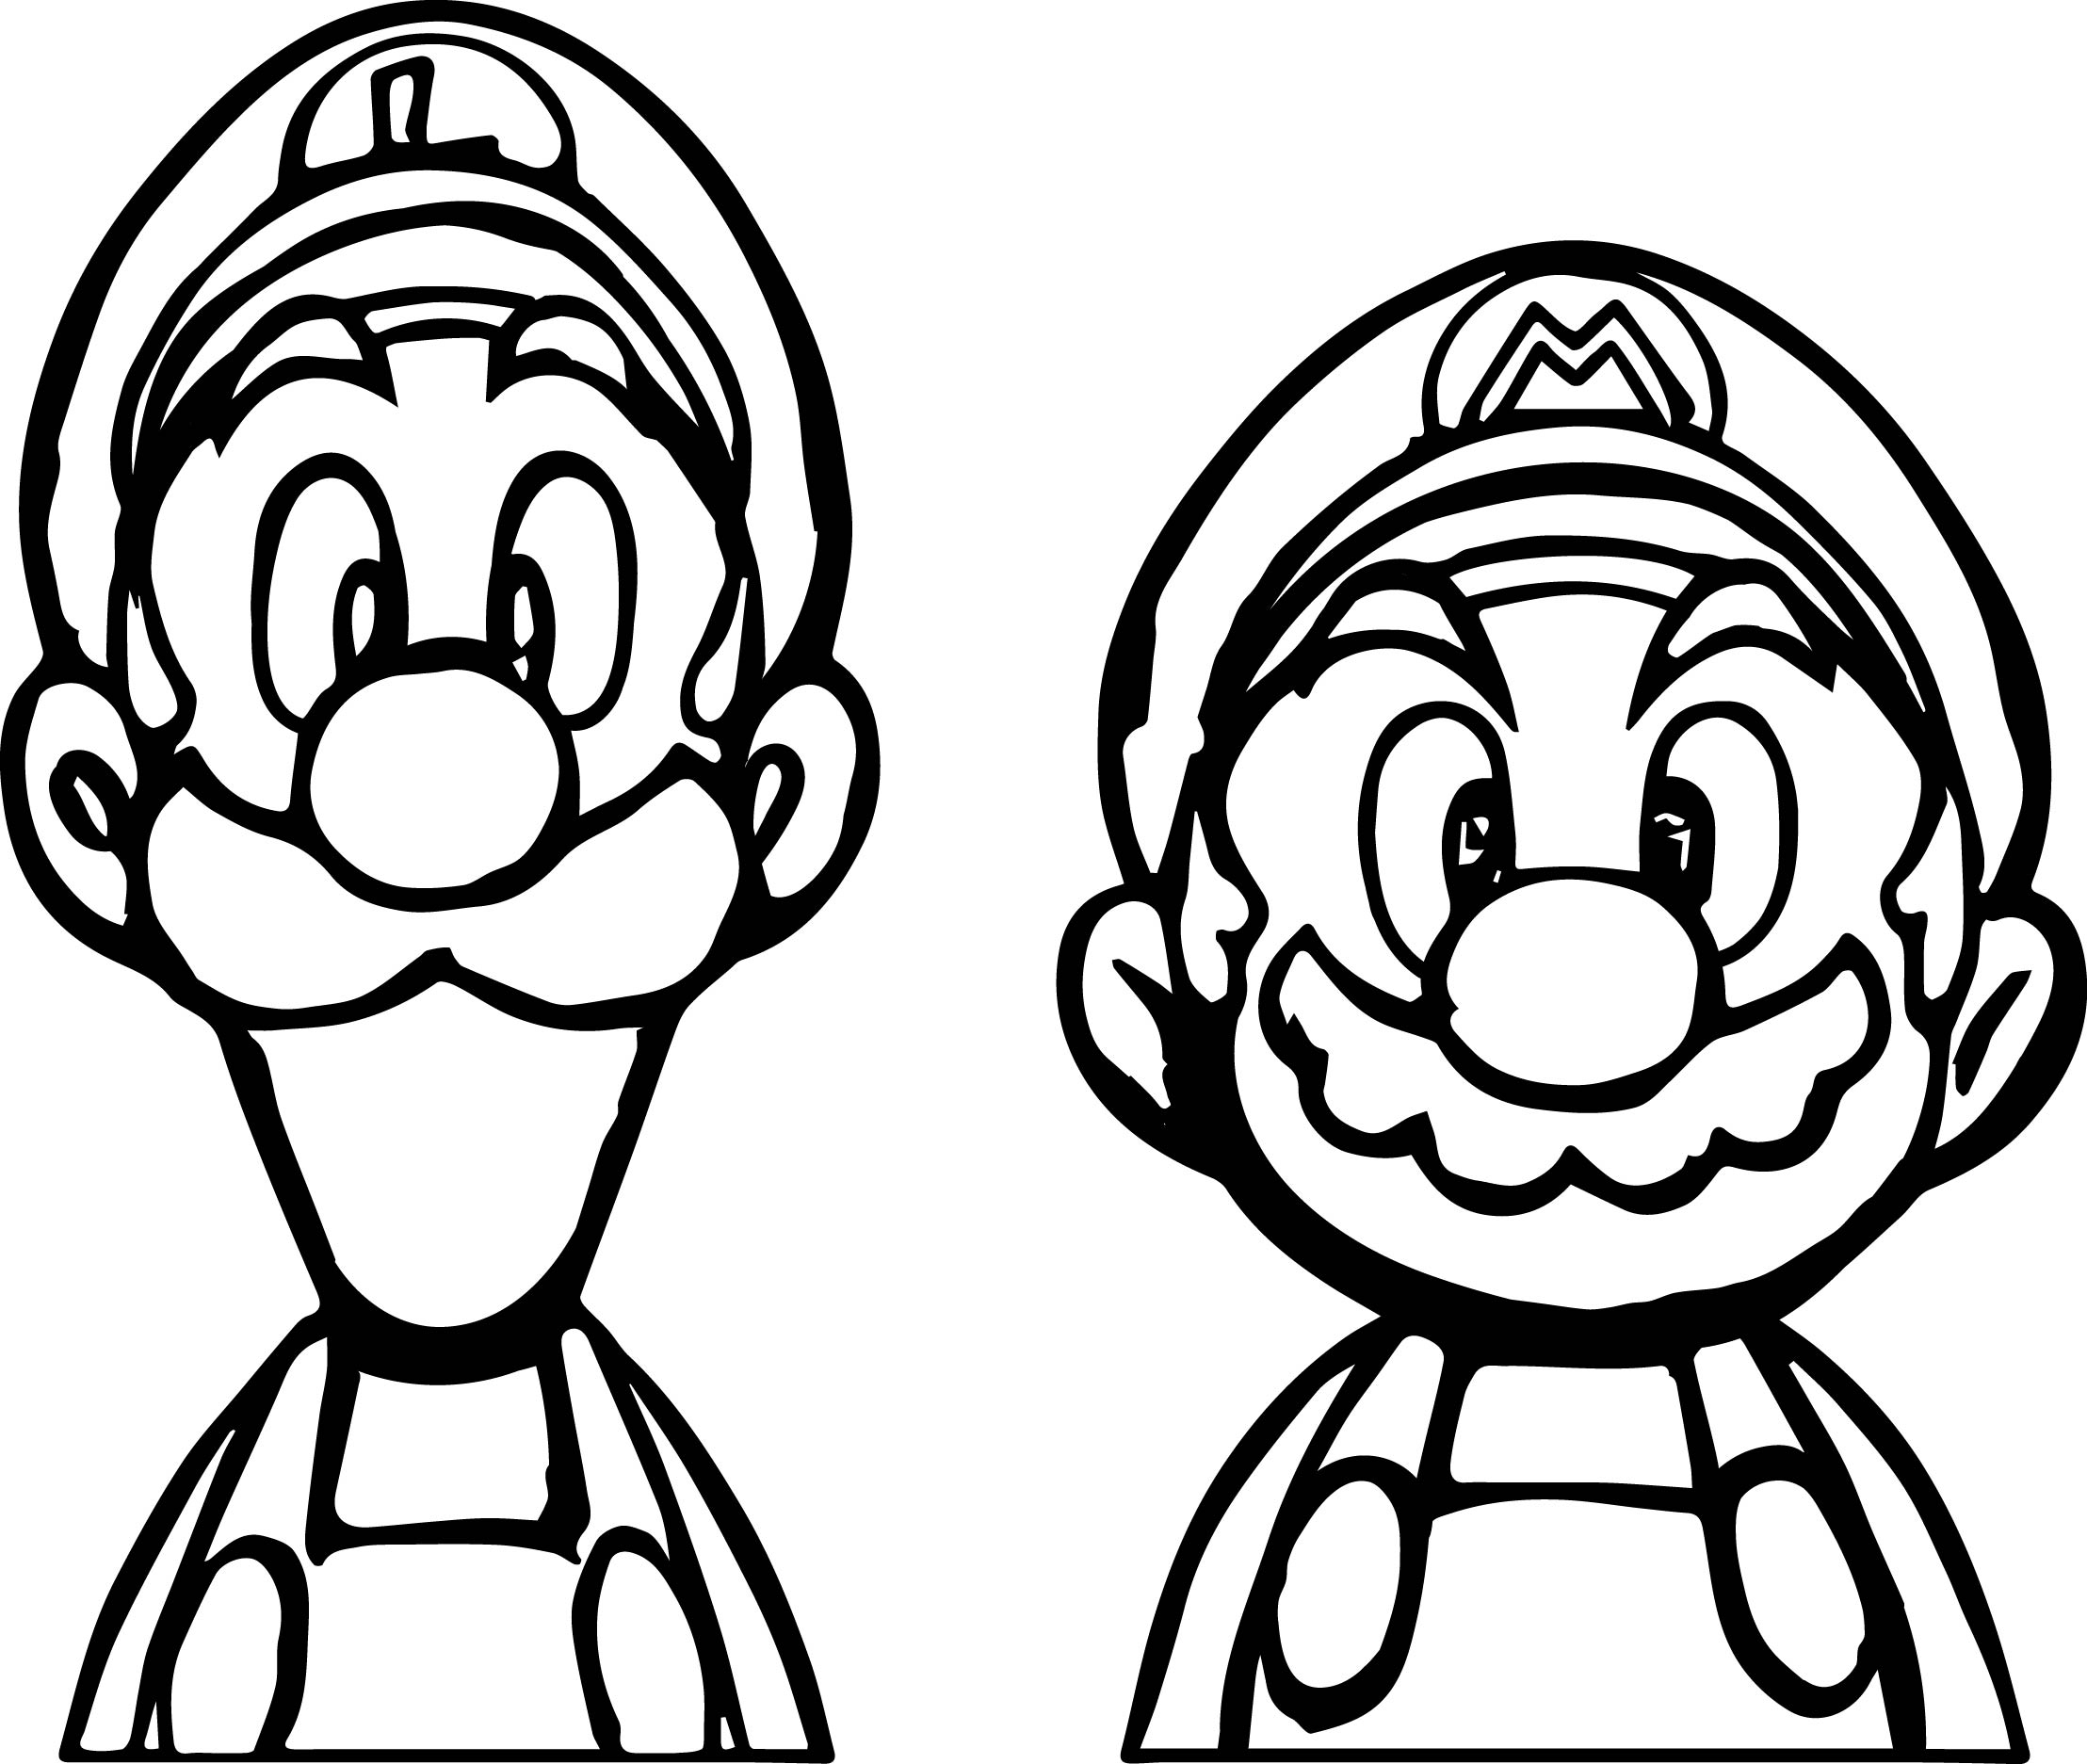 Peach From Mario Coloring Pages Coloring Book Mario Worldg Pages At Getdrawings Com Free For